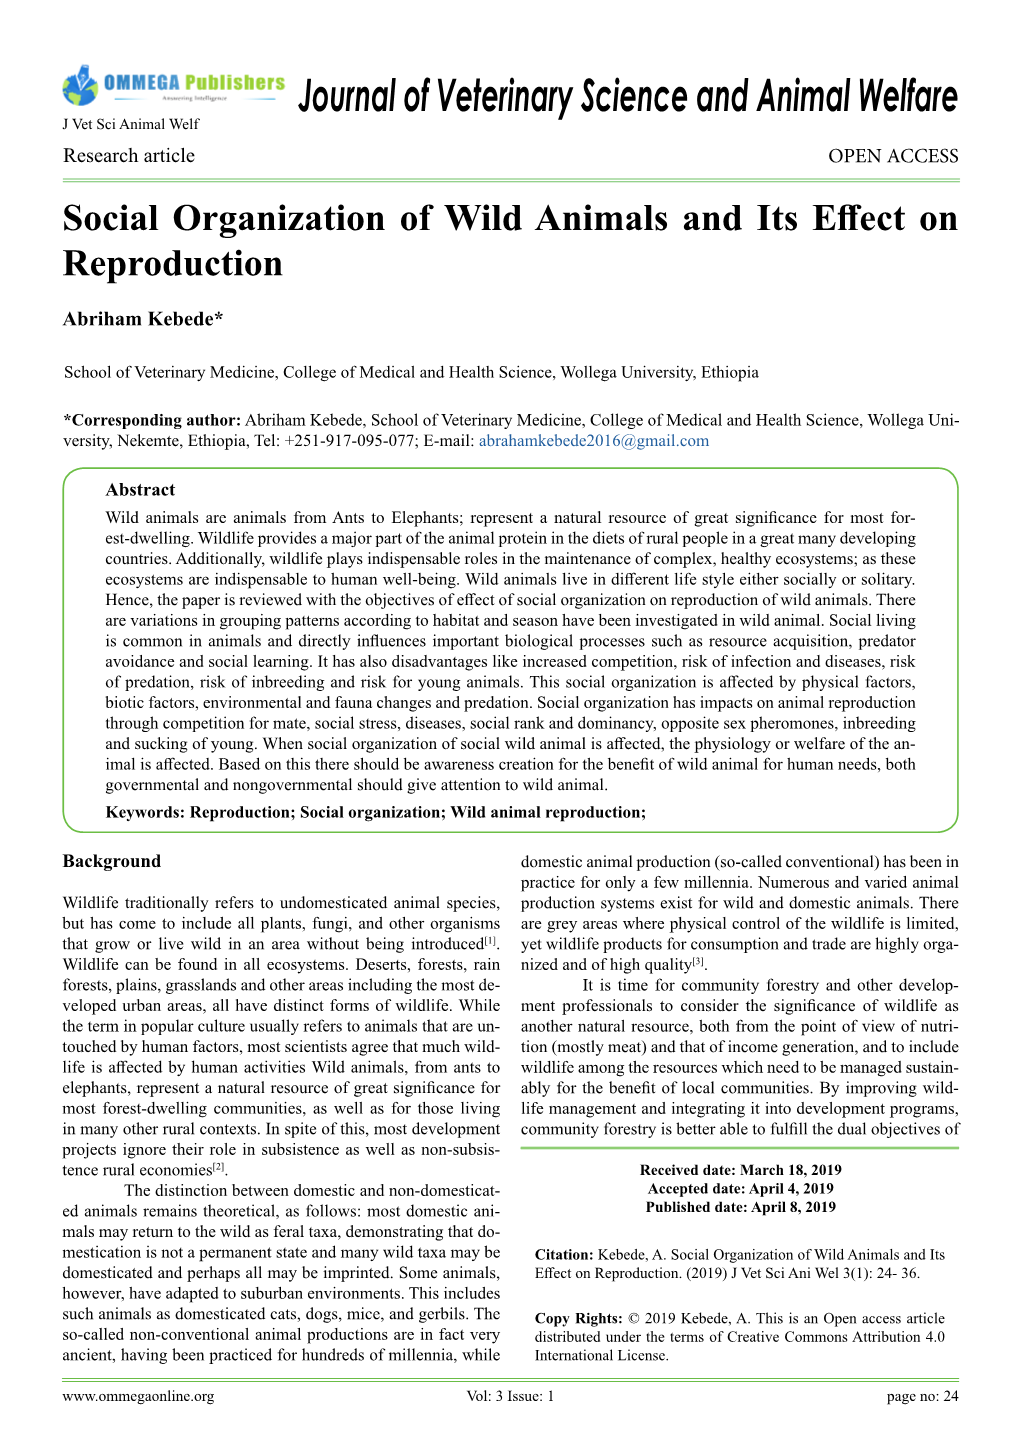 Journal of Veterinary Science and Animal Welfare J Vet Sci Animal Welf Research Article OPEN ACCESS Social Organization of Wild Animals and Its Effect on Reproduction